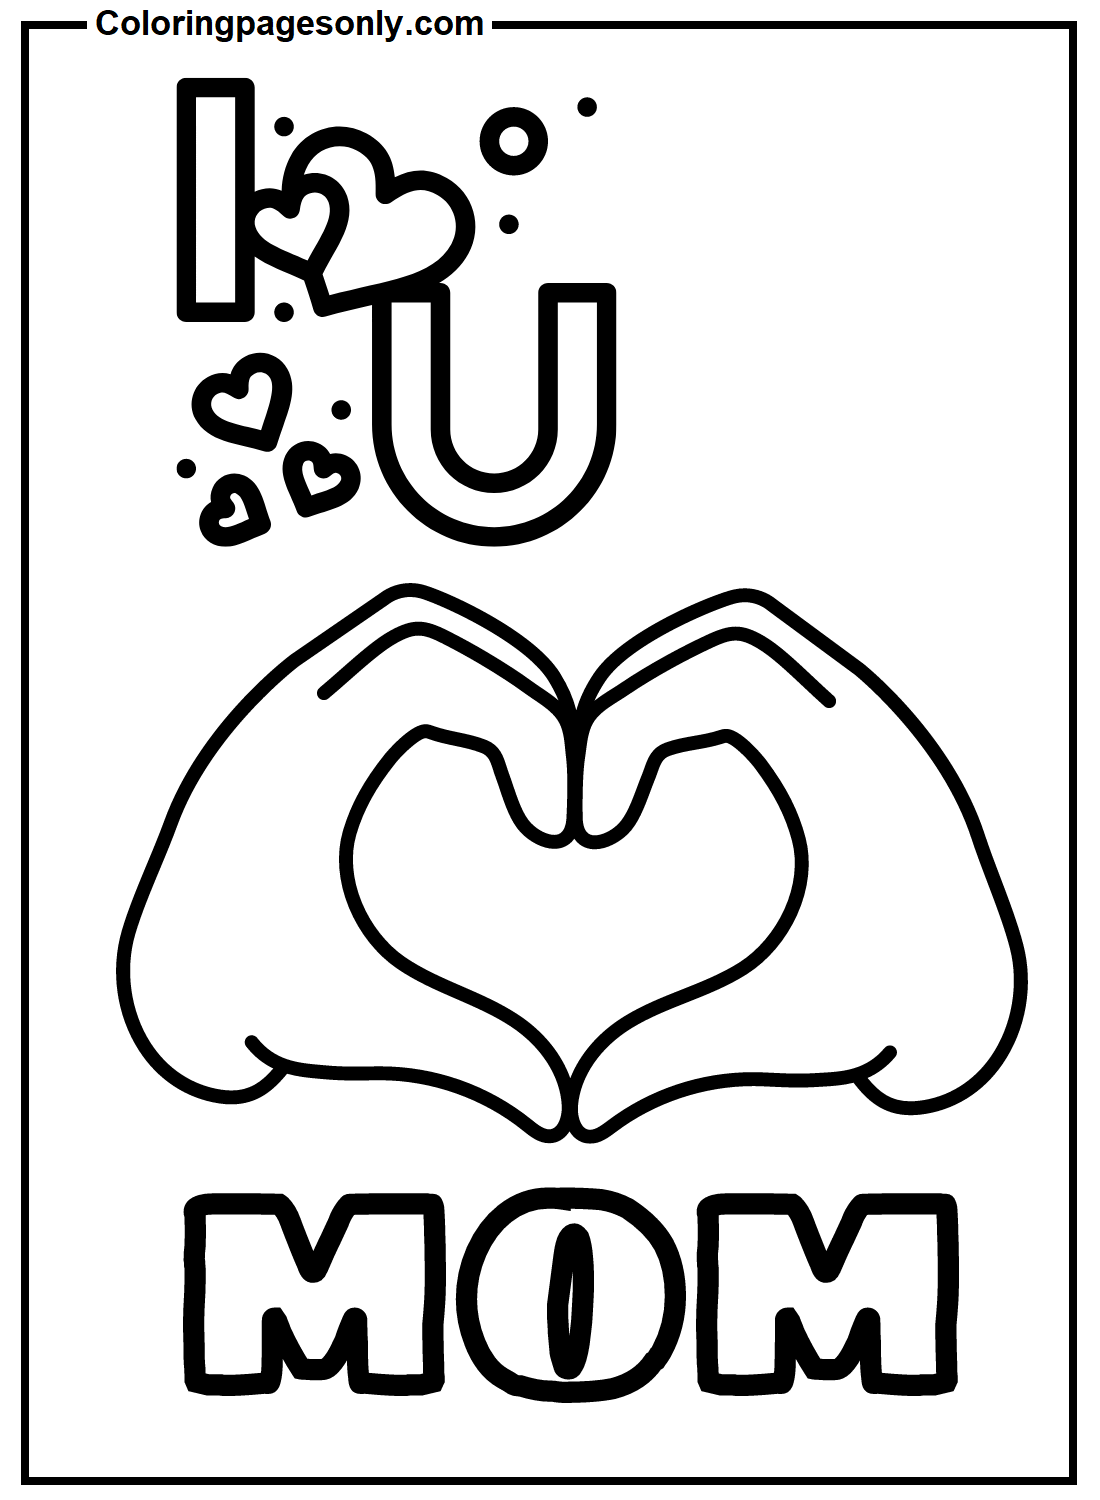 i love you mom image Coloring Page